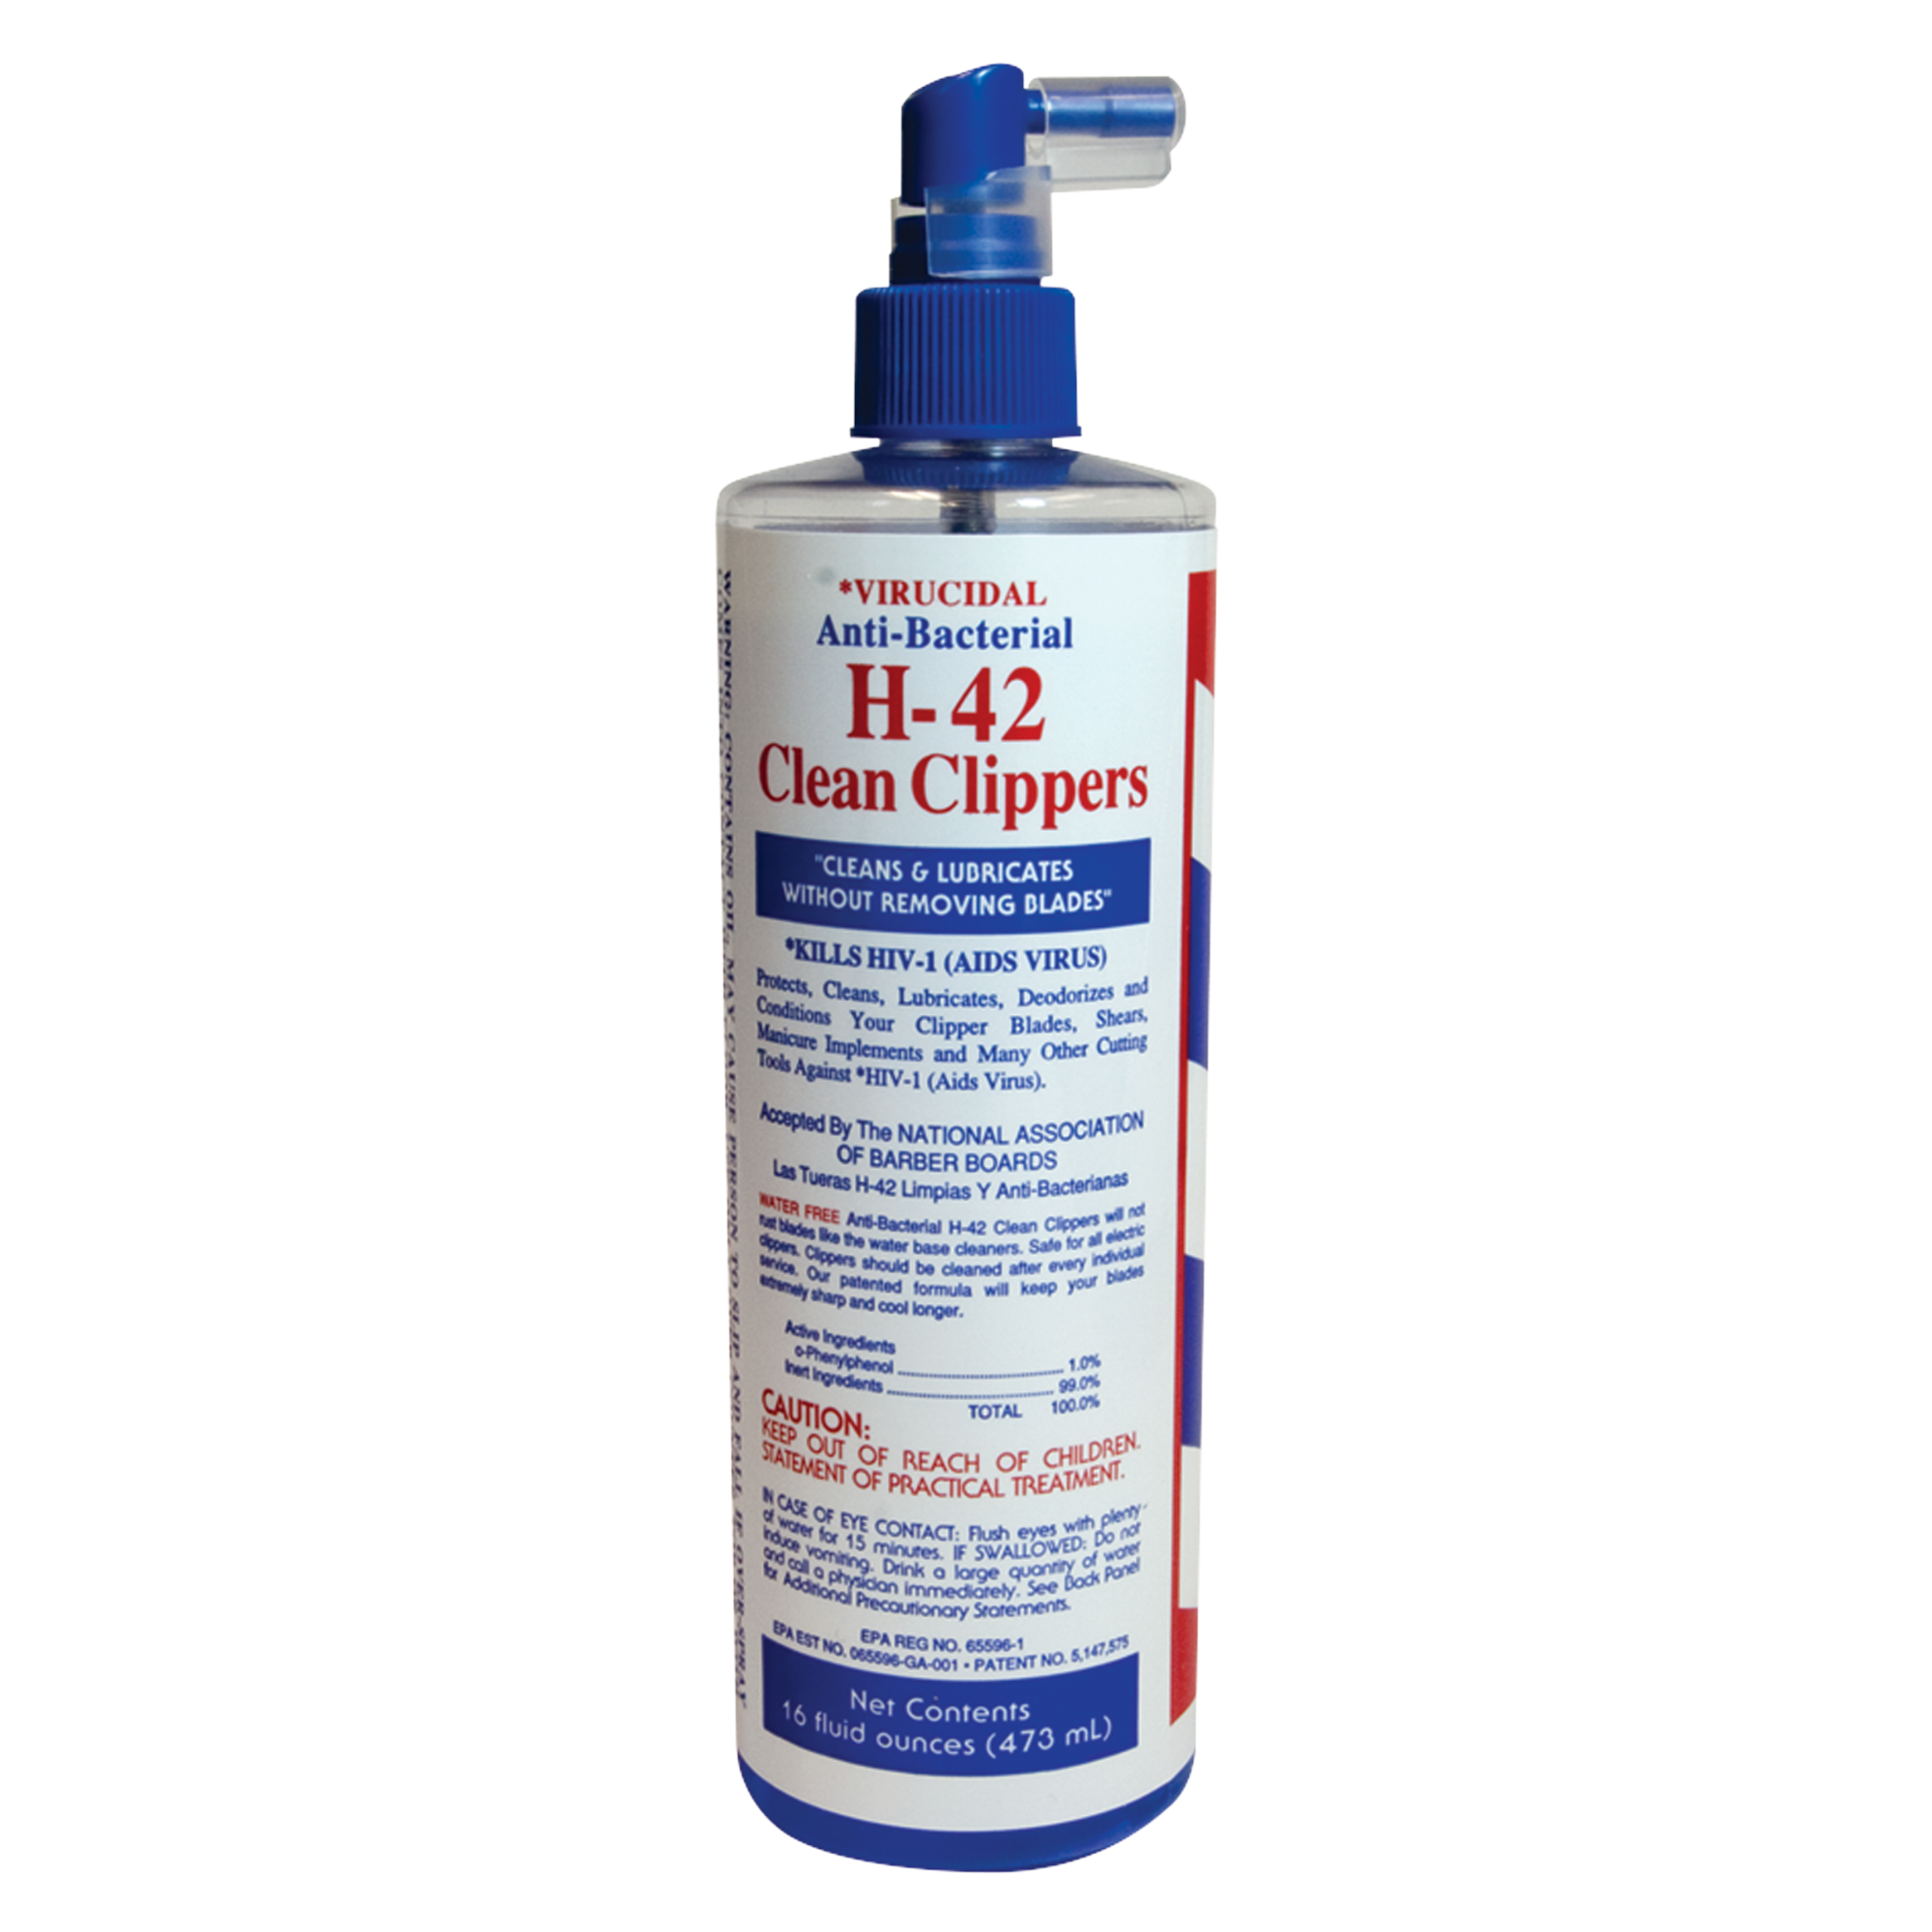 H-42 Clean Clippers